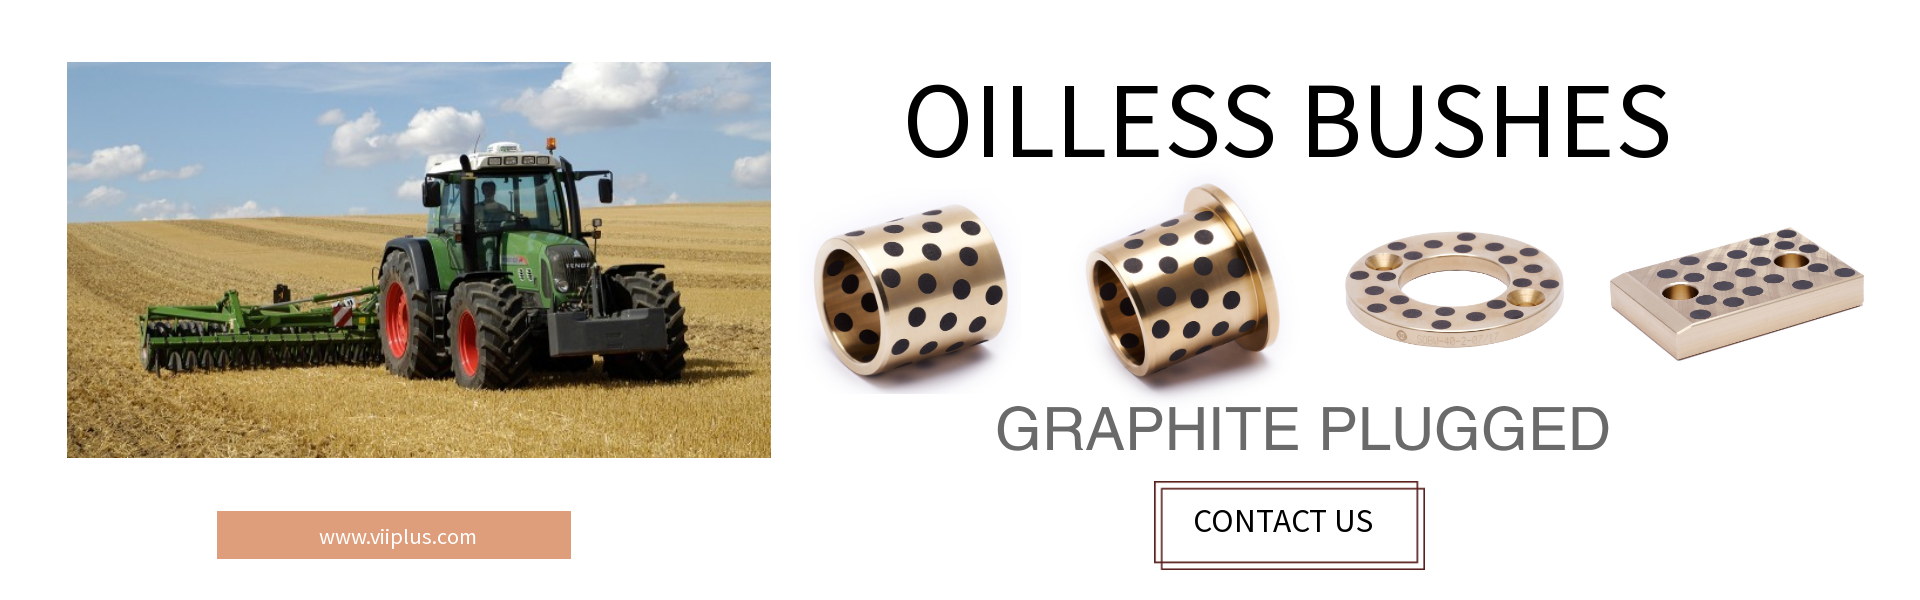 oilless bushing application-agriculture